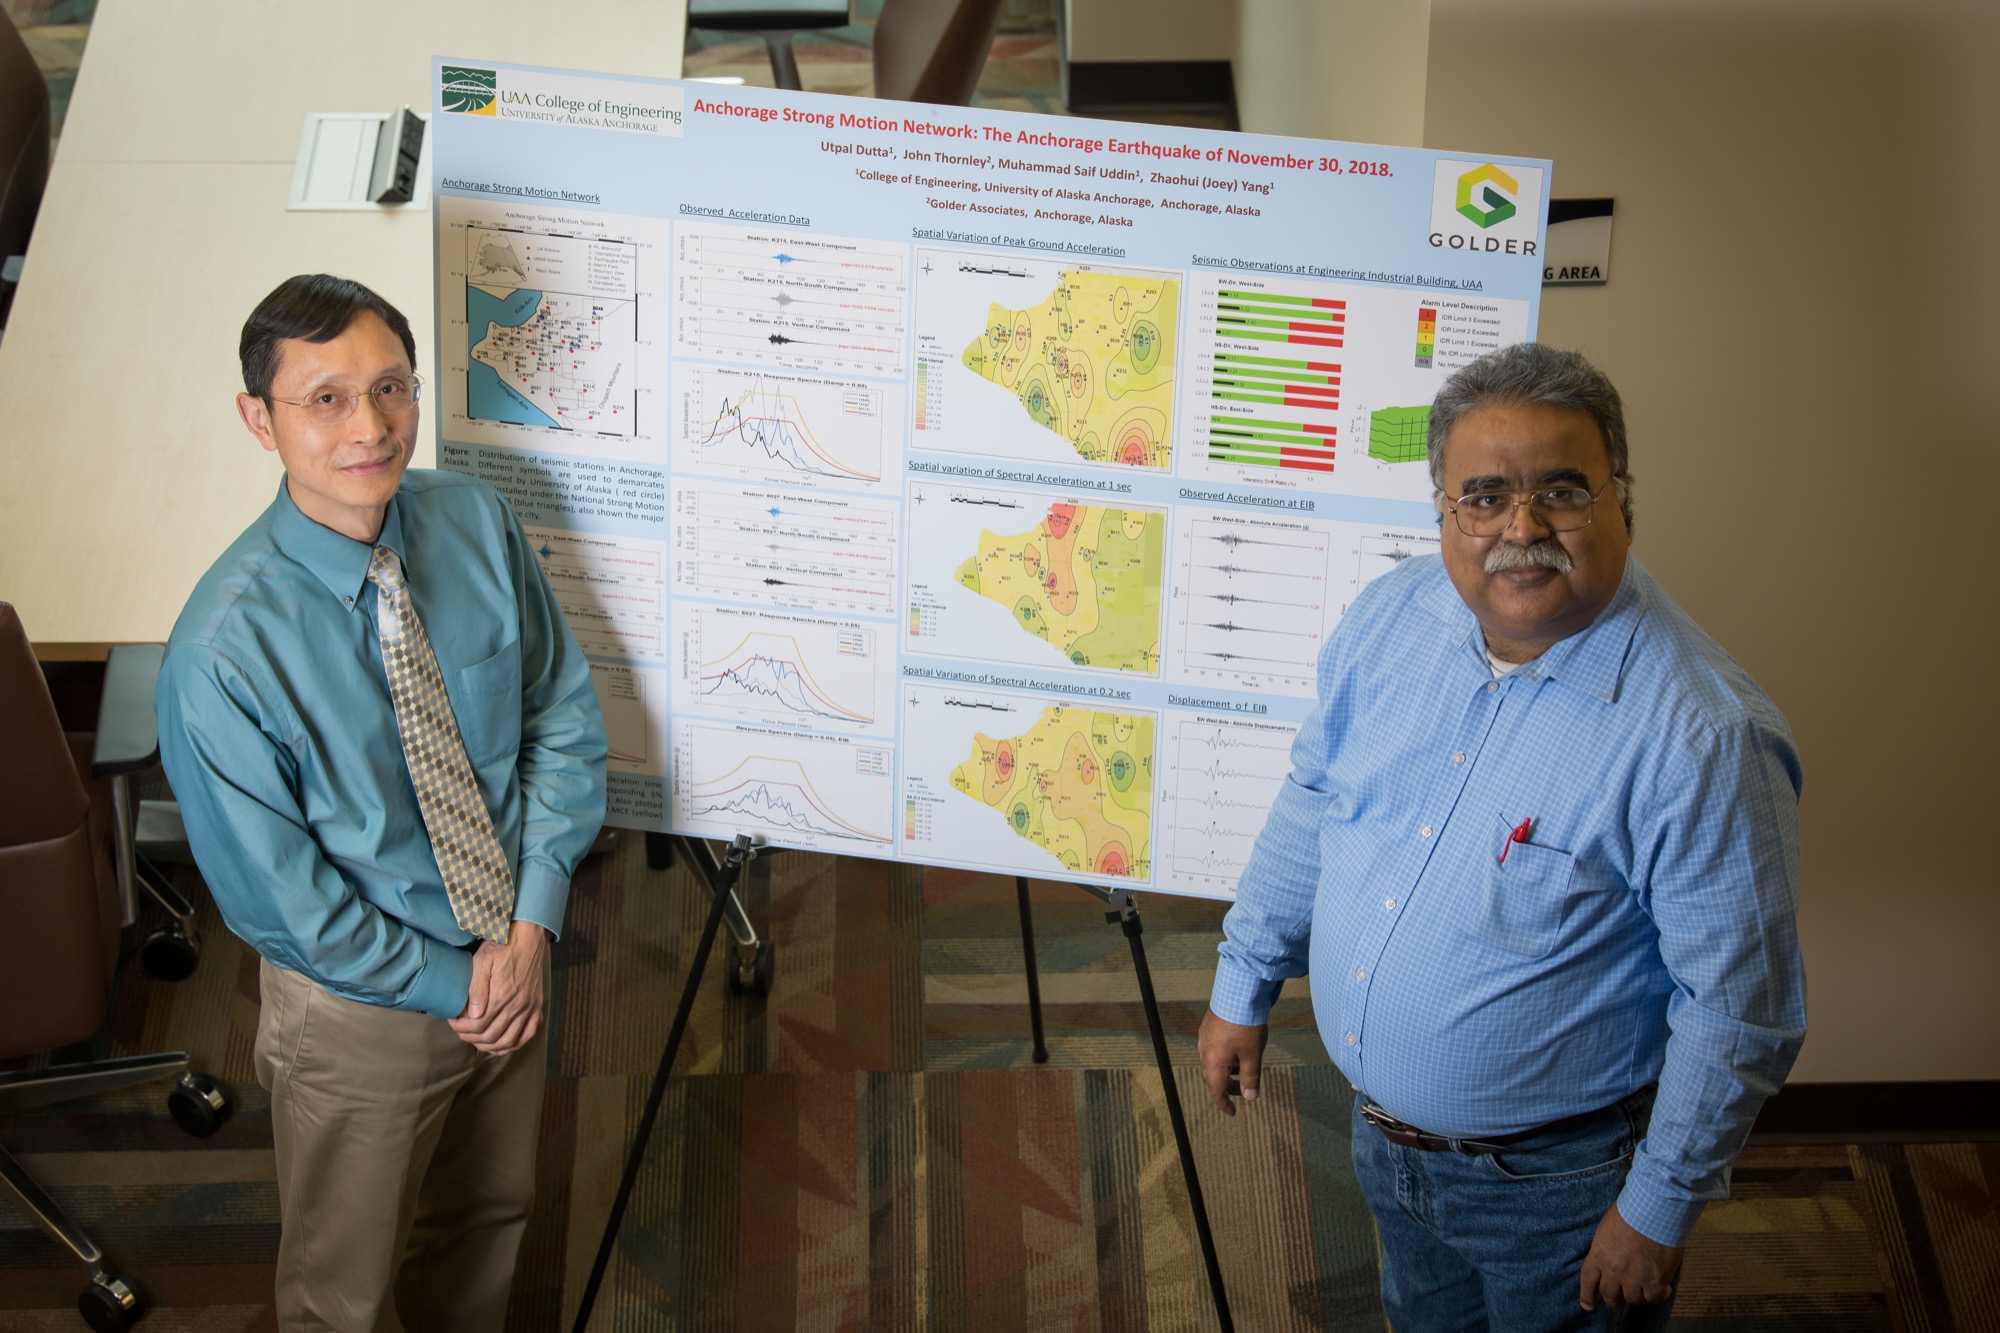 Professor and chair of the civil engineering department Joey Yang (left), and associate professor of civil engineering Utpal Dutta (right), presenting an updated map of earthquake activity and ground characteristics around Anchorage.